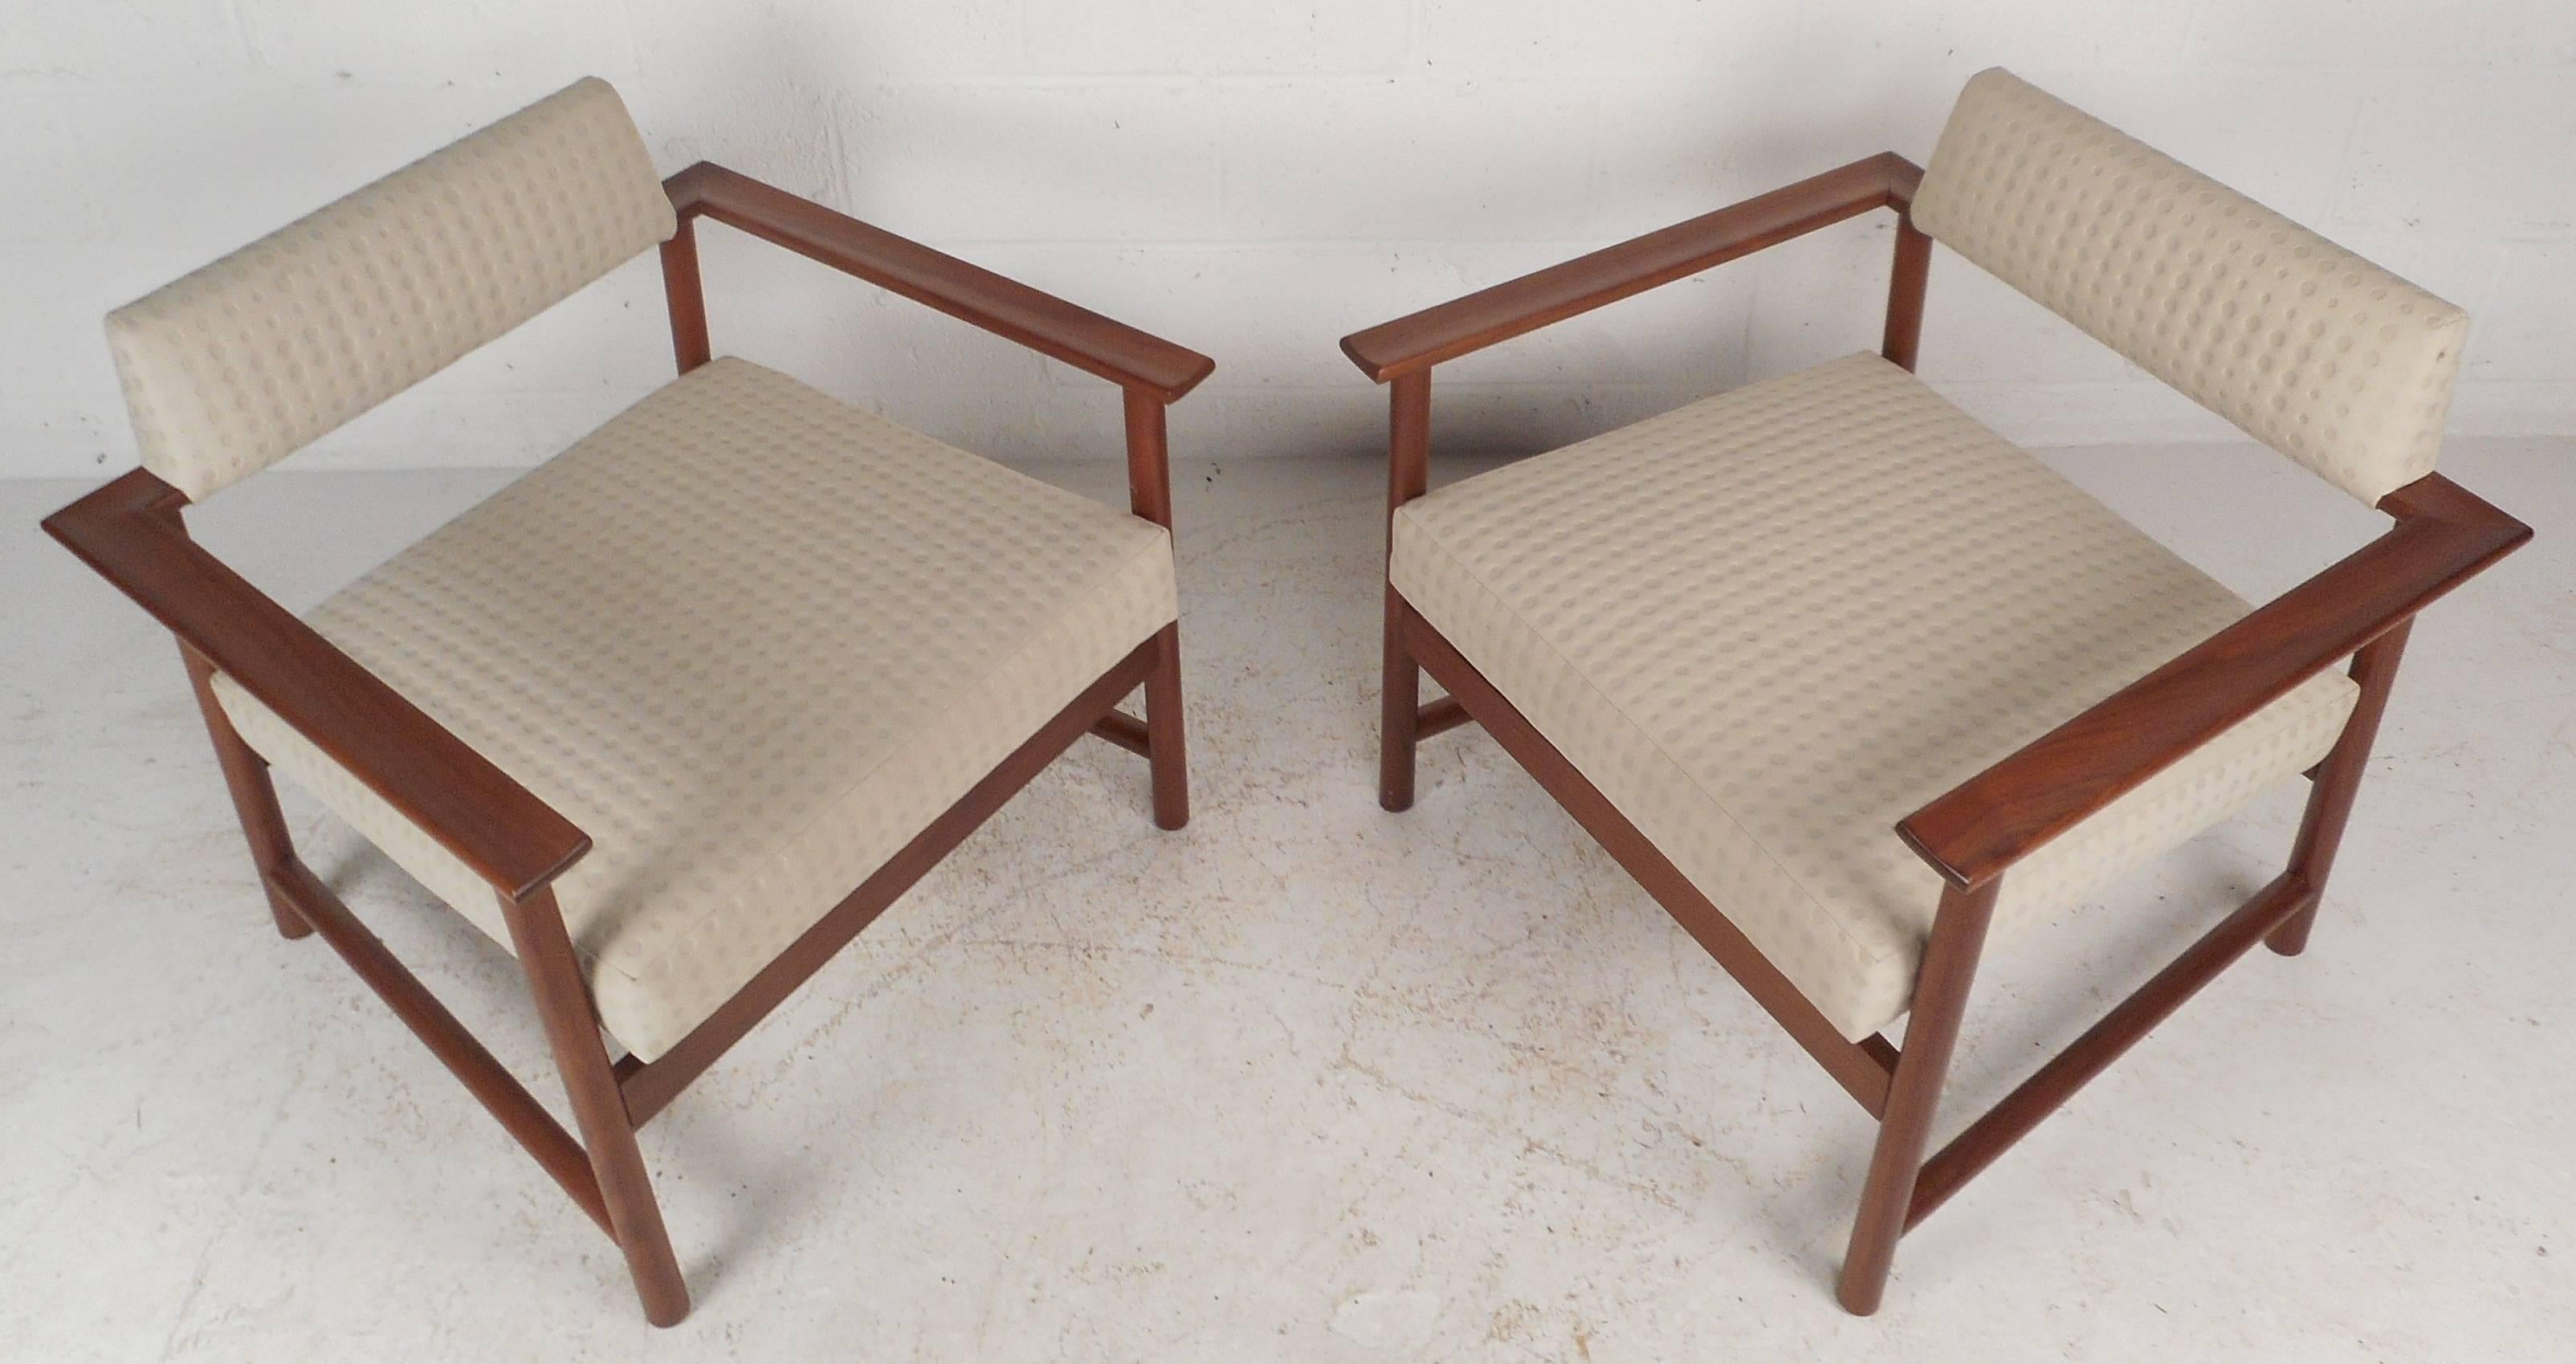 This beautiful pair of vintage modern lounge chairs feature an open frame design with a unique floating backrest. The solid walnut frame displays gorgeous wood grain and provides maximum sturdiness. Extremely comfortable pair with plush white